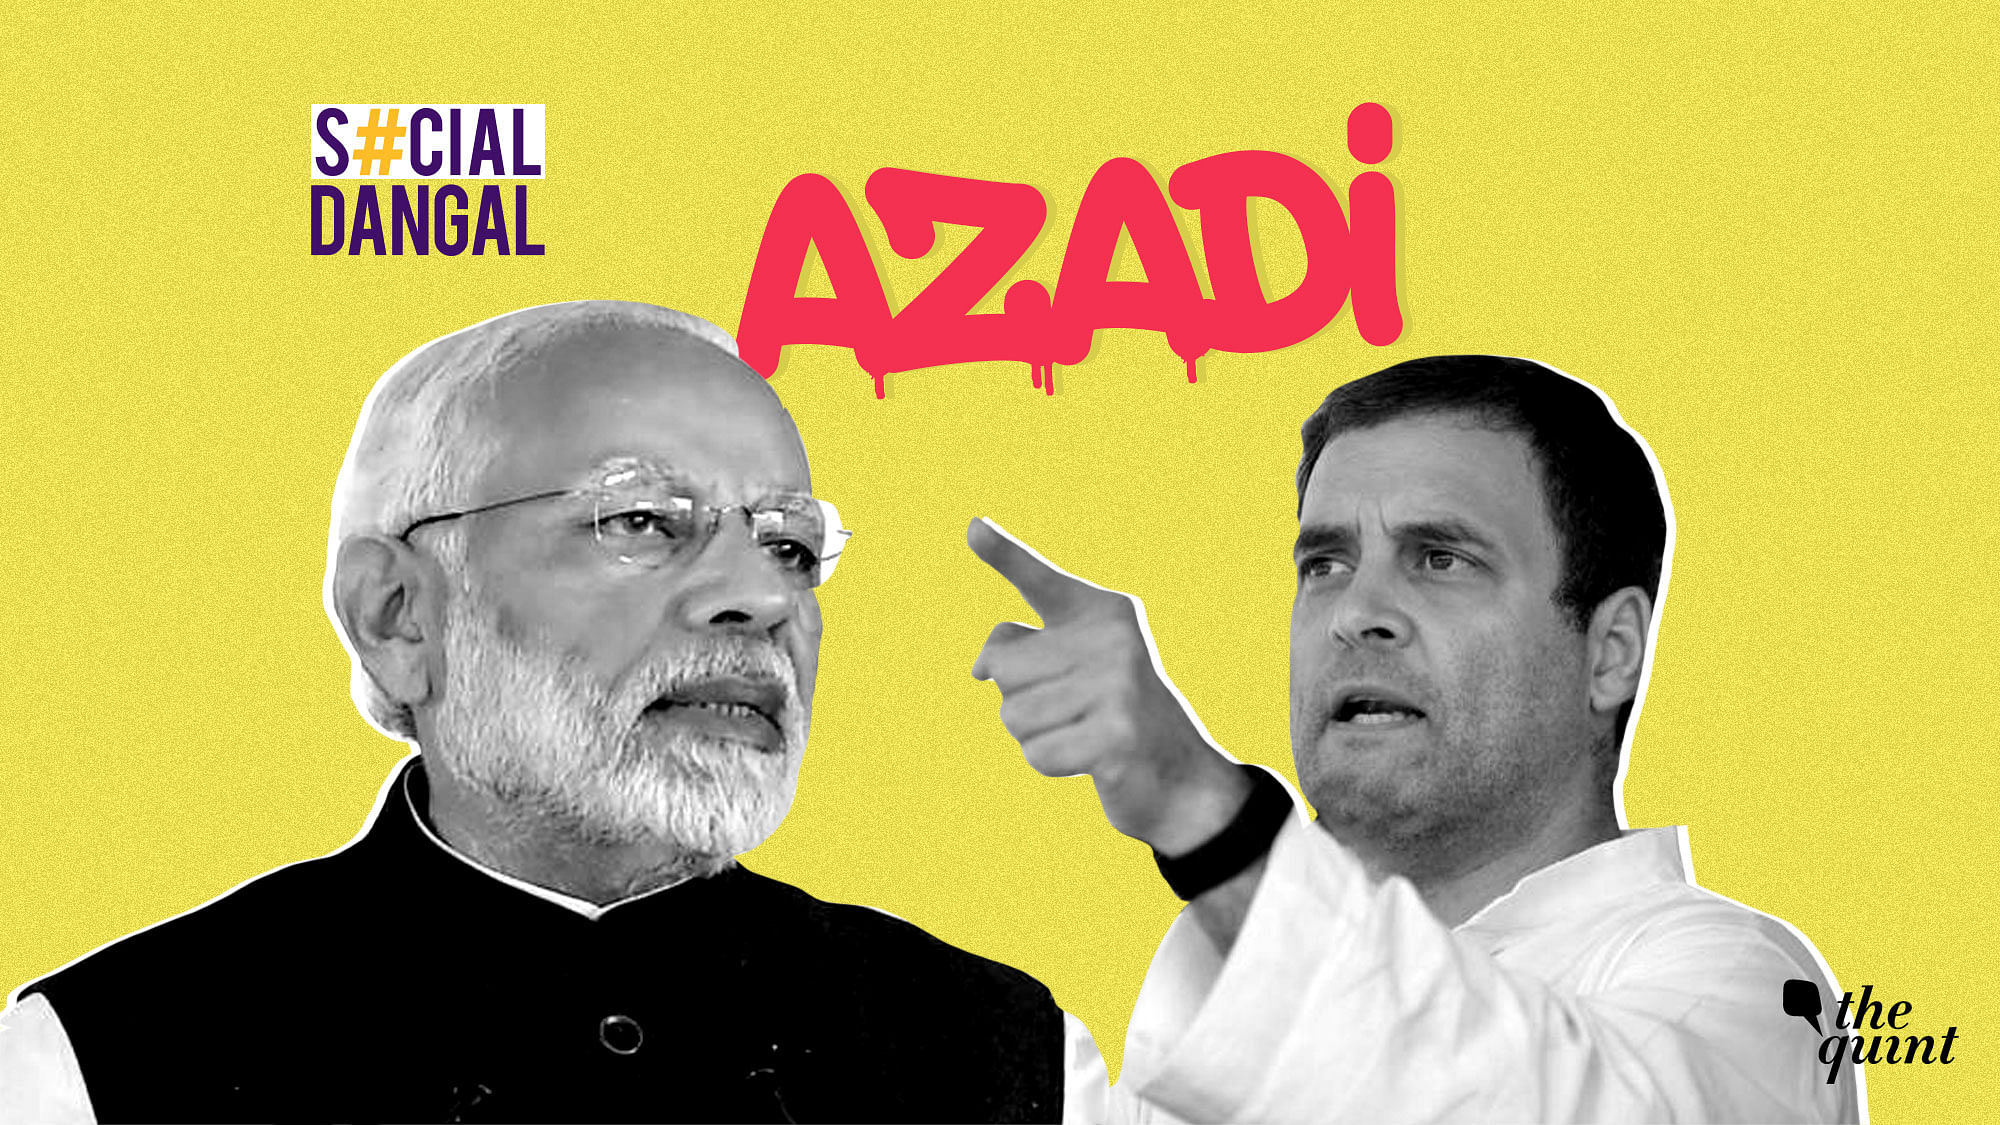 Both the parties posted videos with a reworked Azadi song from Gully Boy.&nbsp;